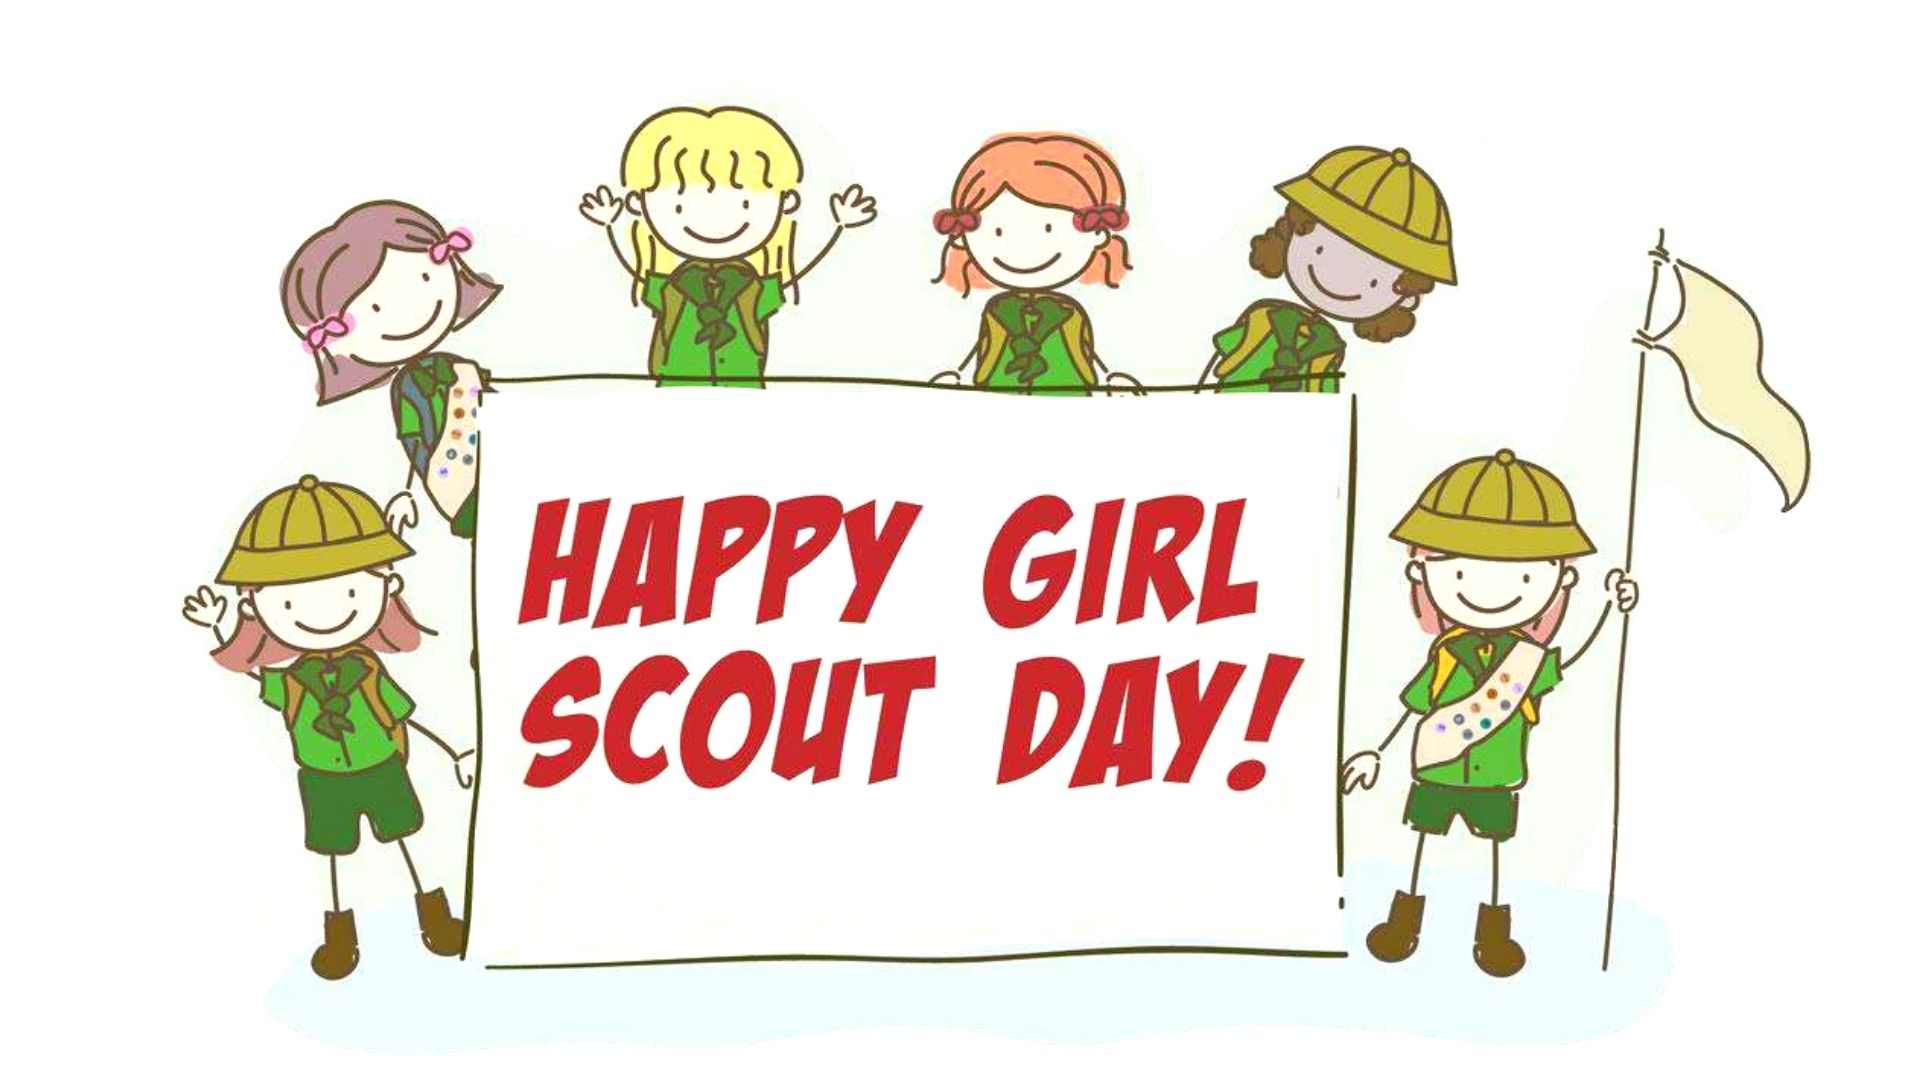 Happy Girl Scout Day Image and Wallpapers 12 March